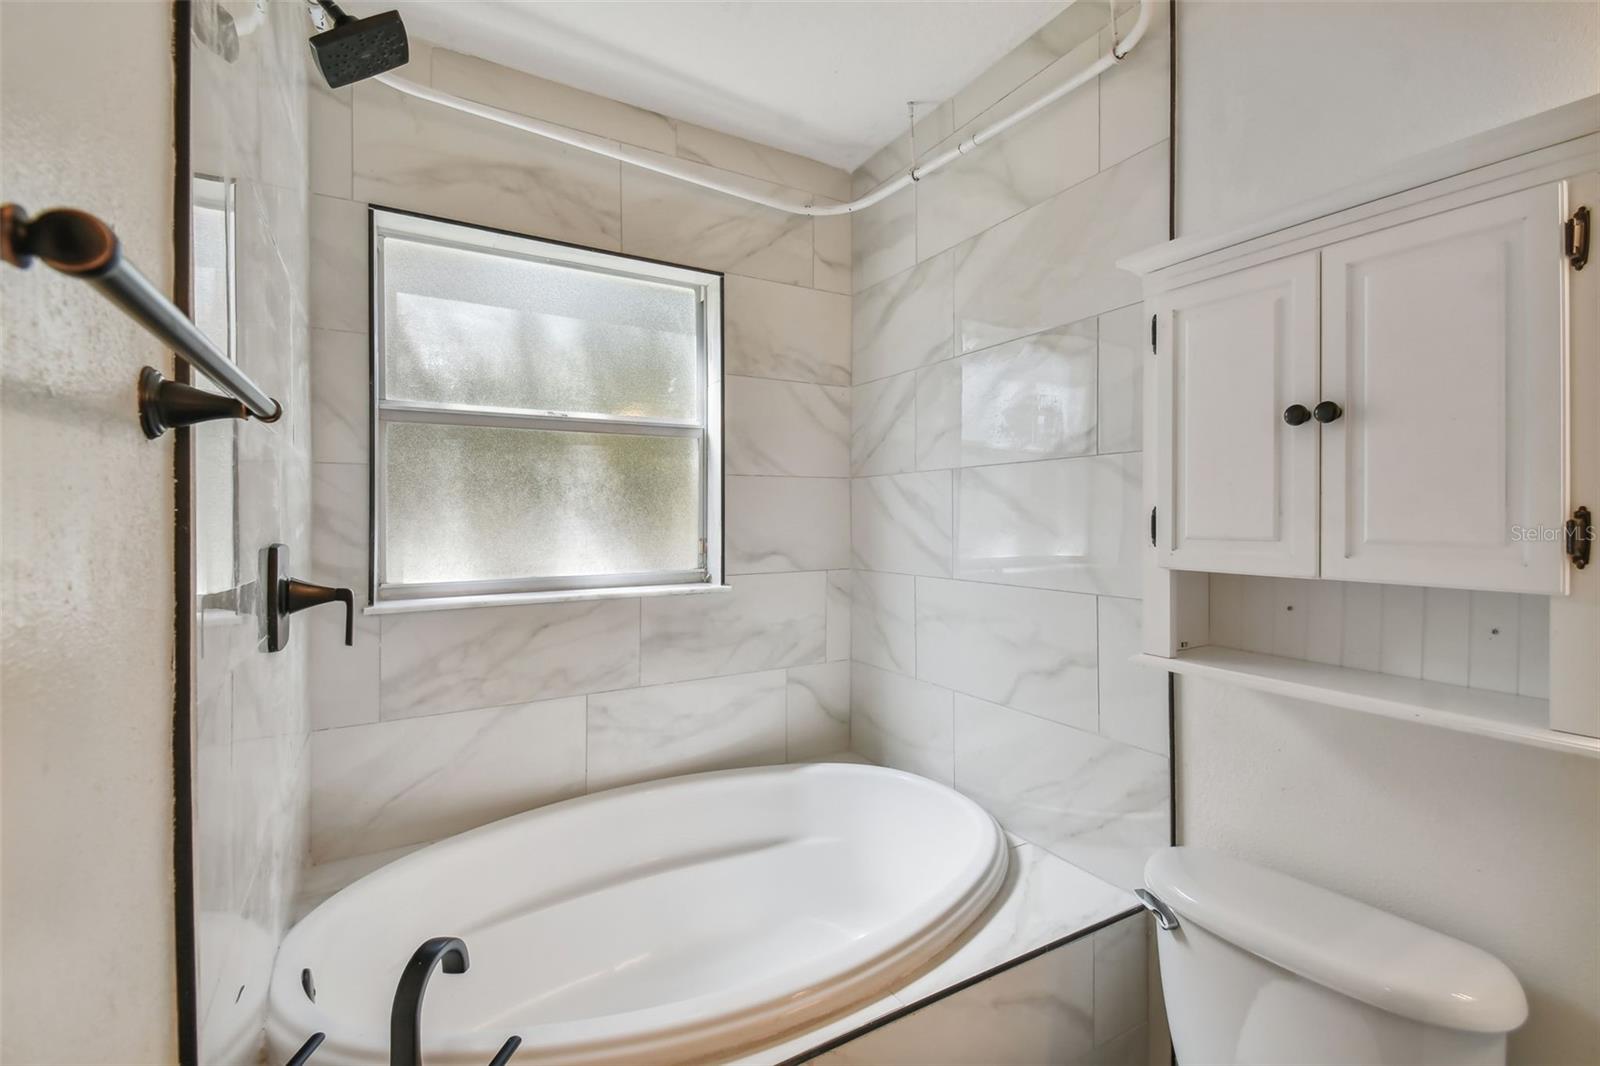 Tub and shower combo with lovely porcelain tile